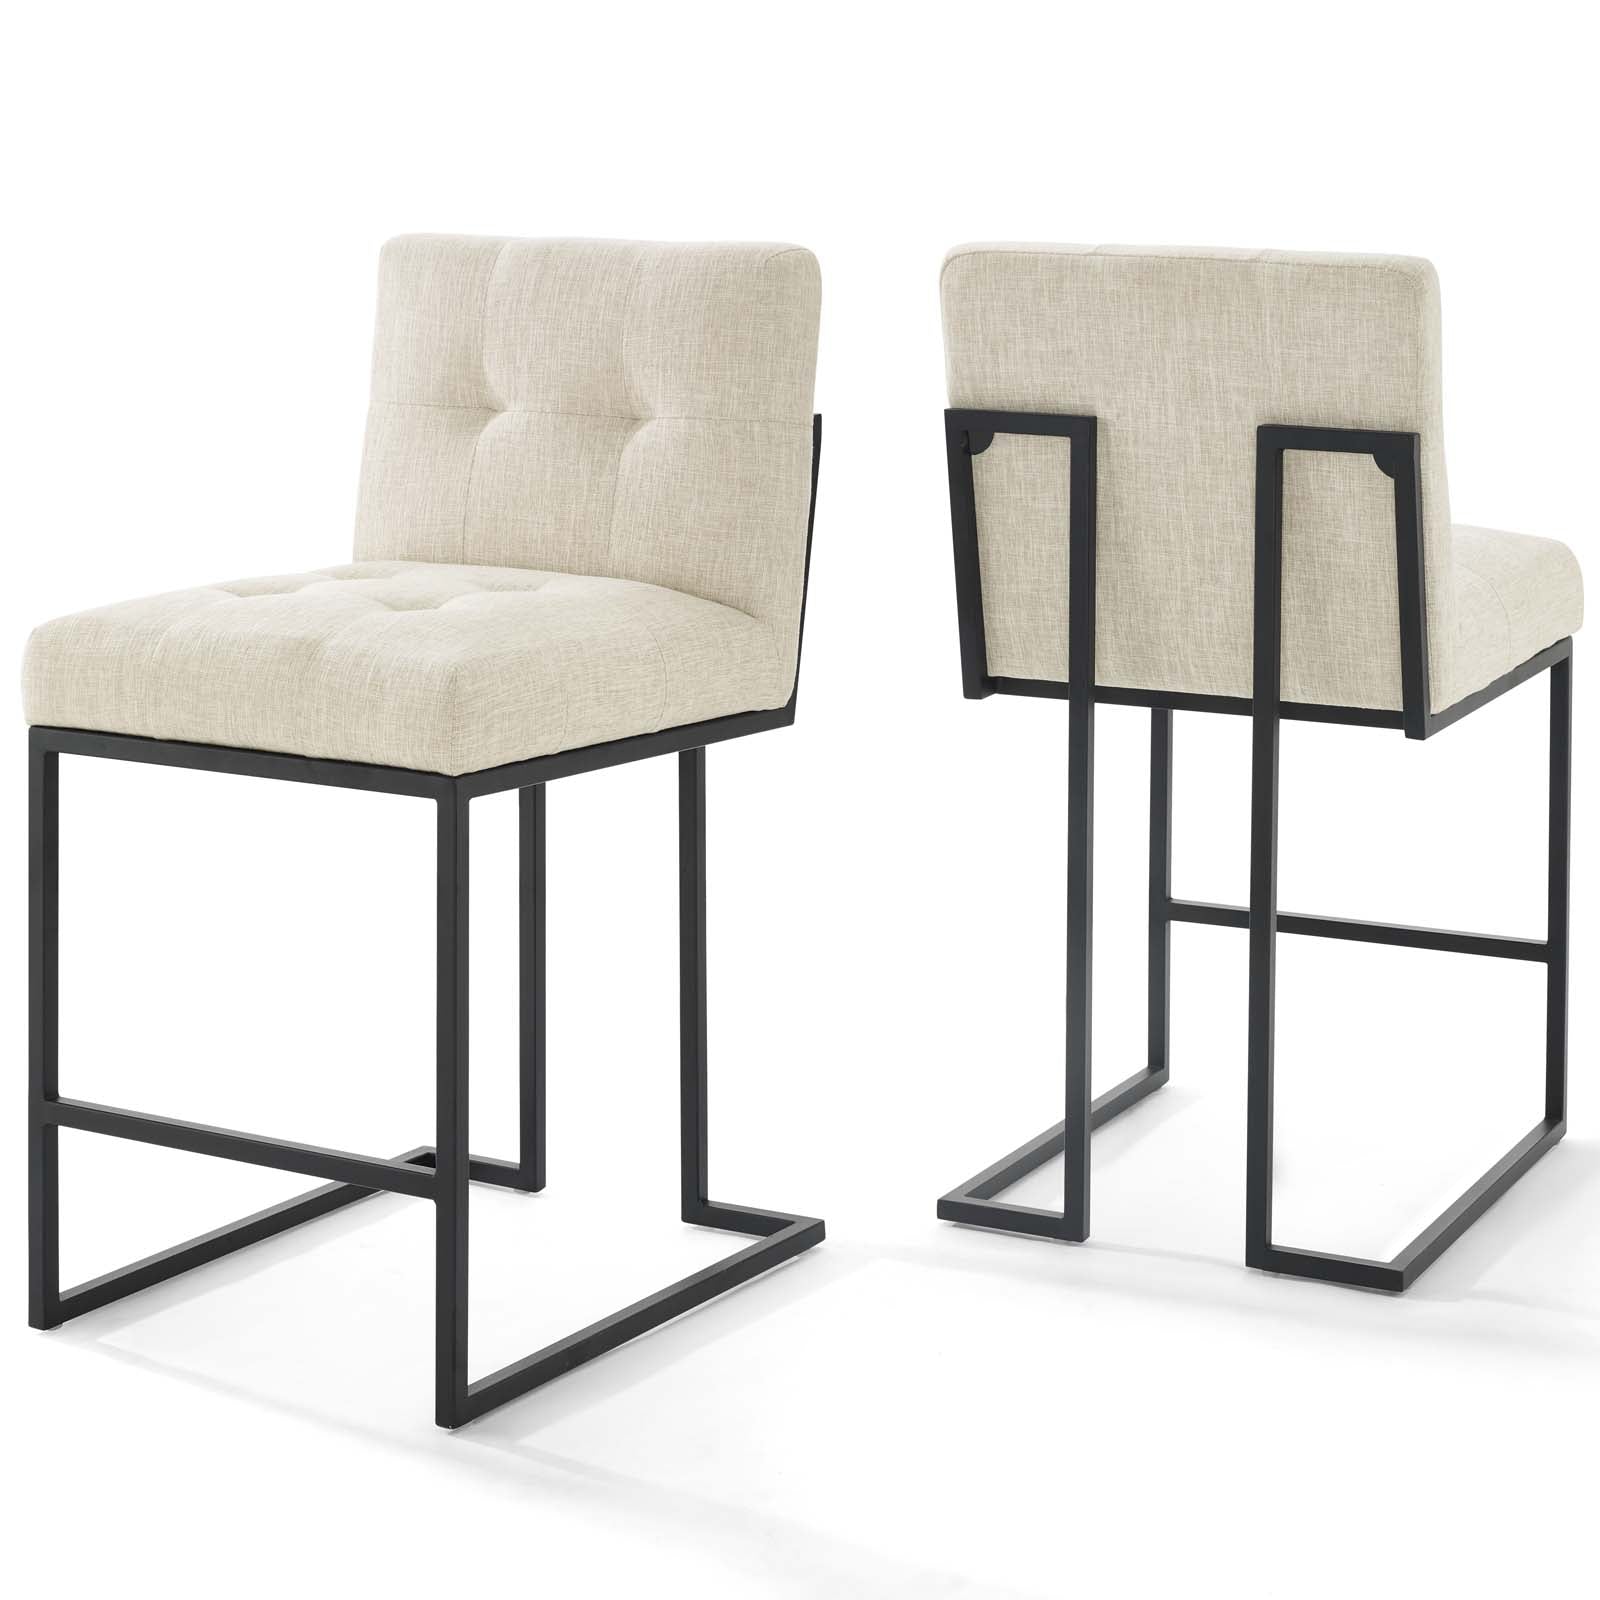 Modway Barstools - Privy Fabric Counter Stool Black Beige (Set of 2)